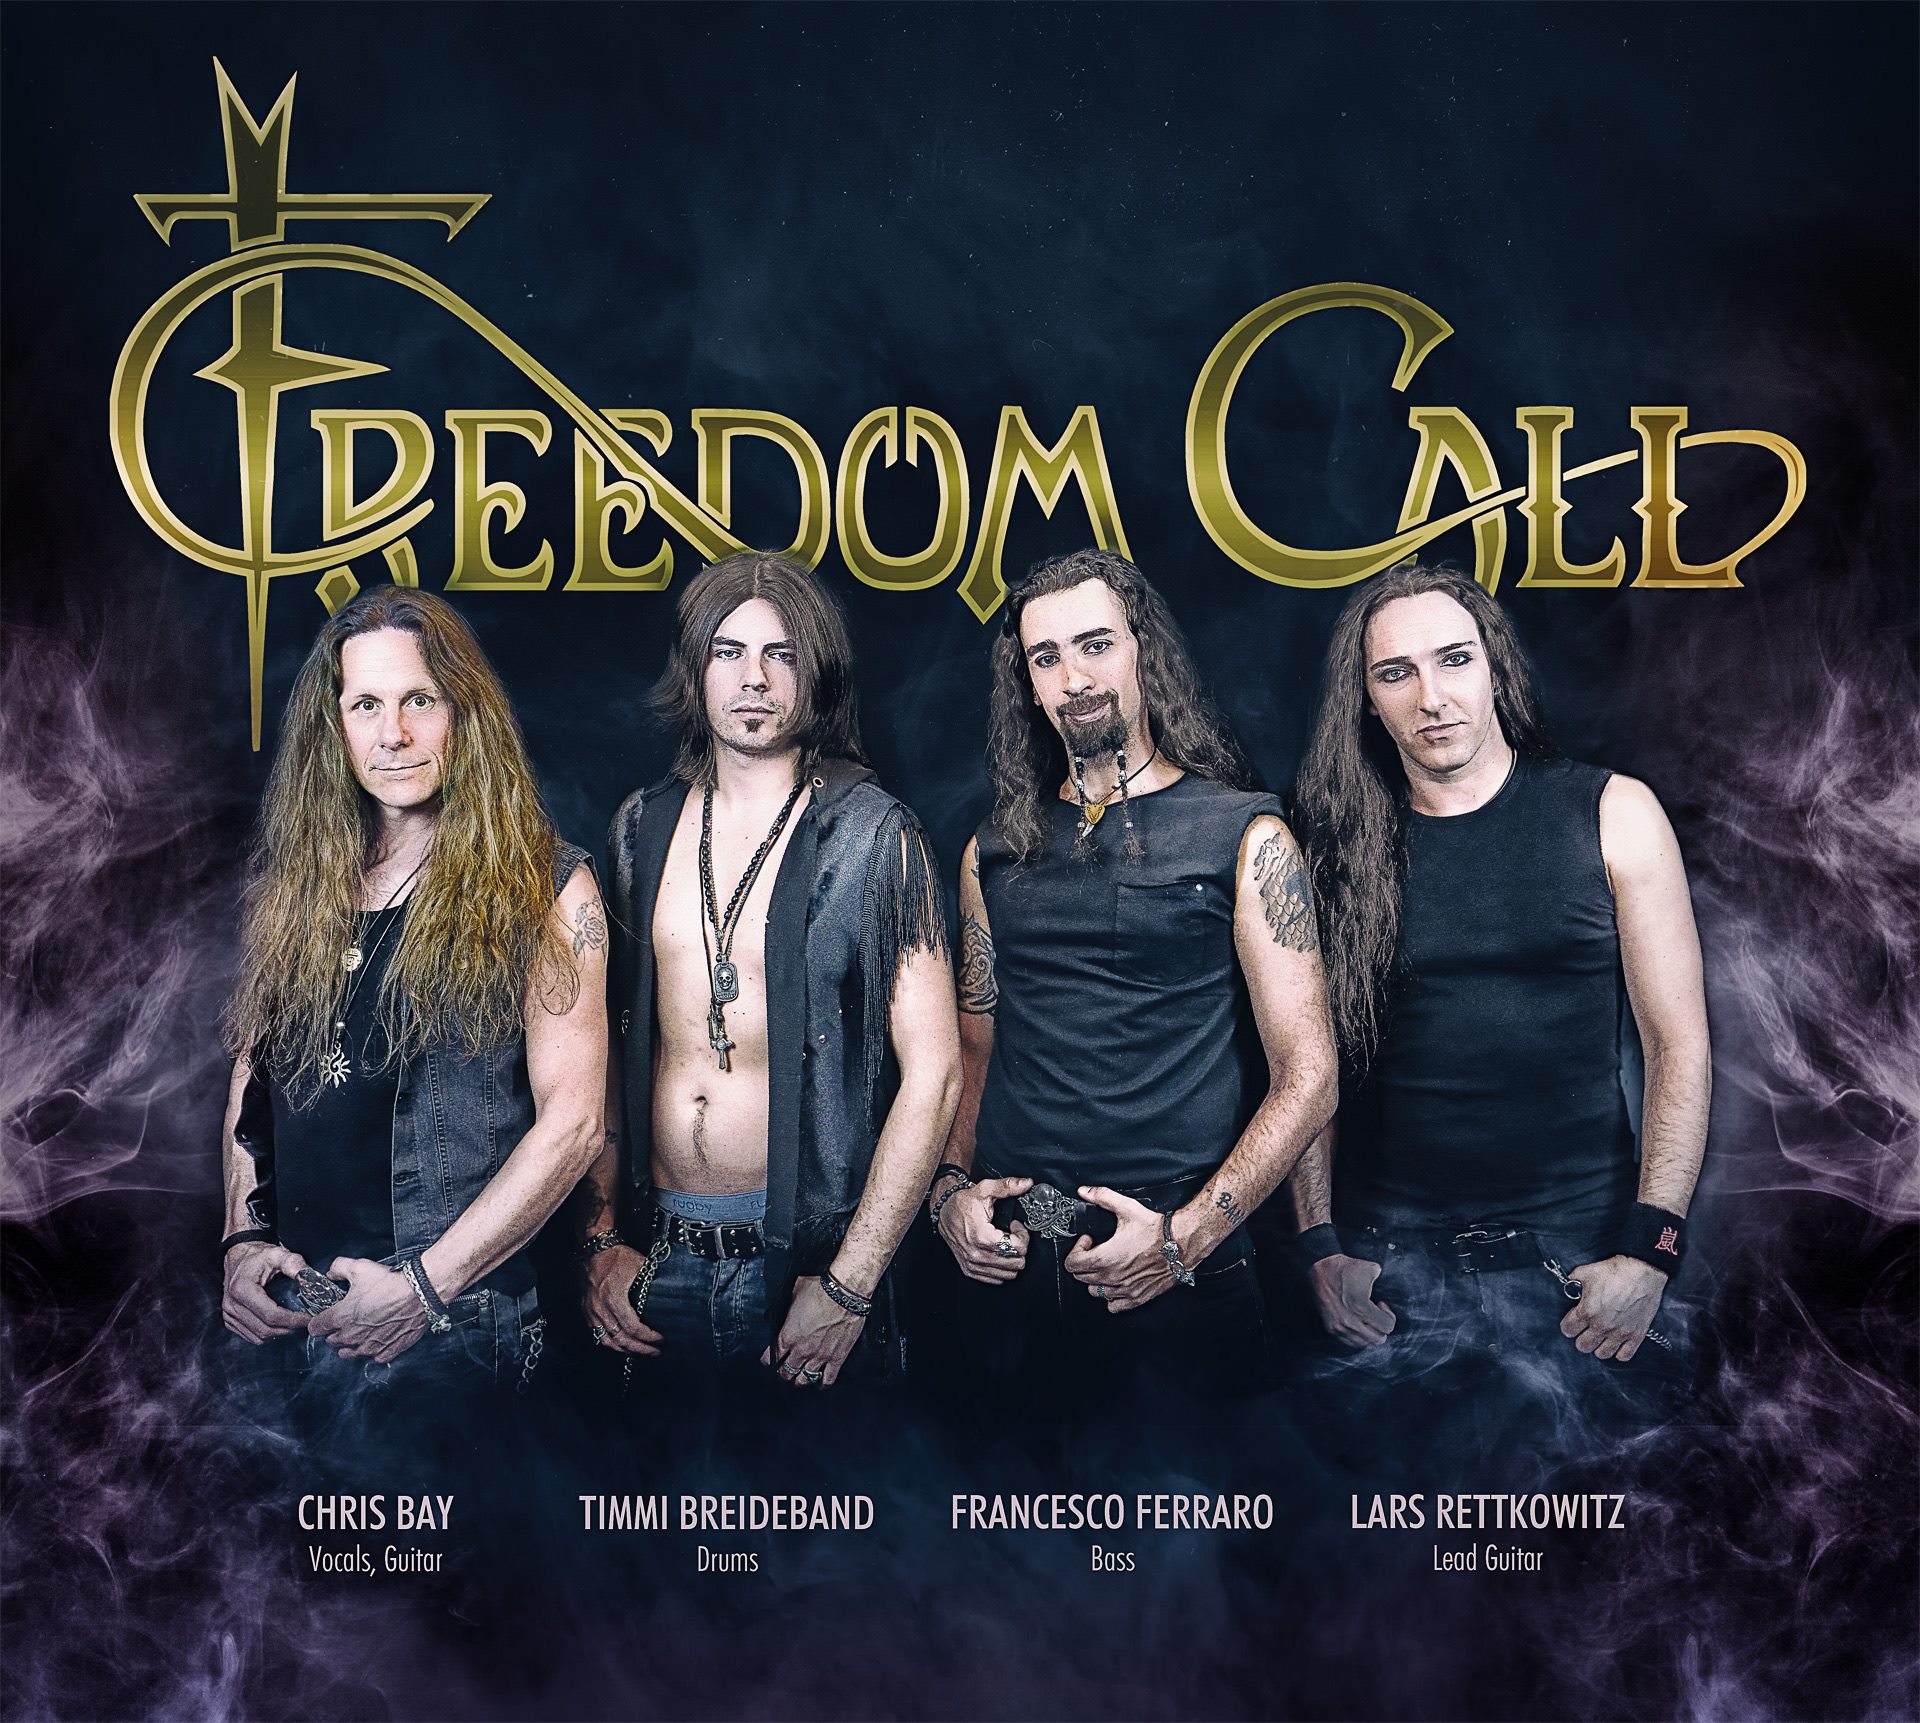 FREEDOM CALL releases tour teaser for fall tour / new album in August